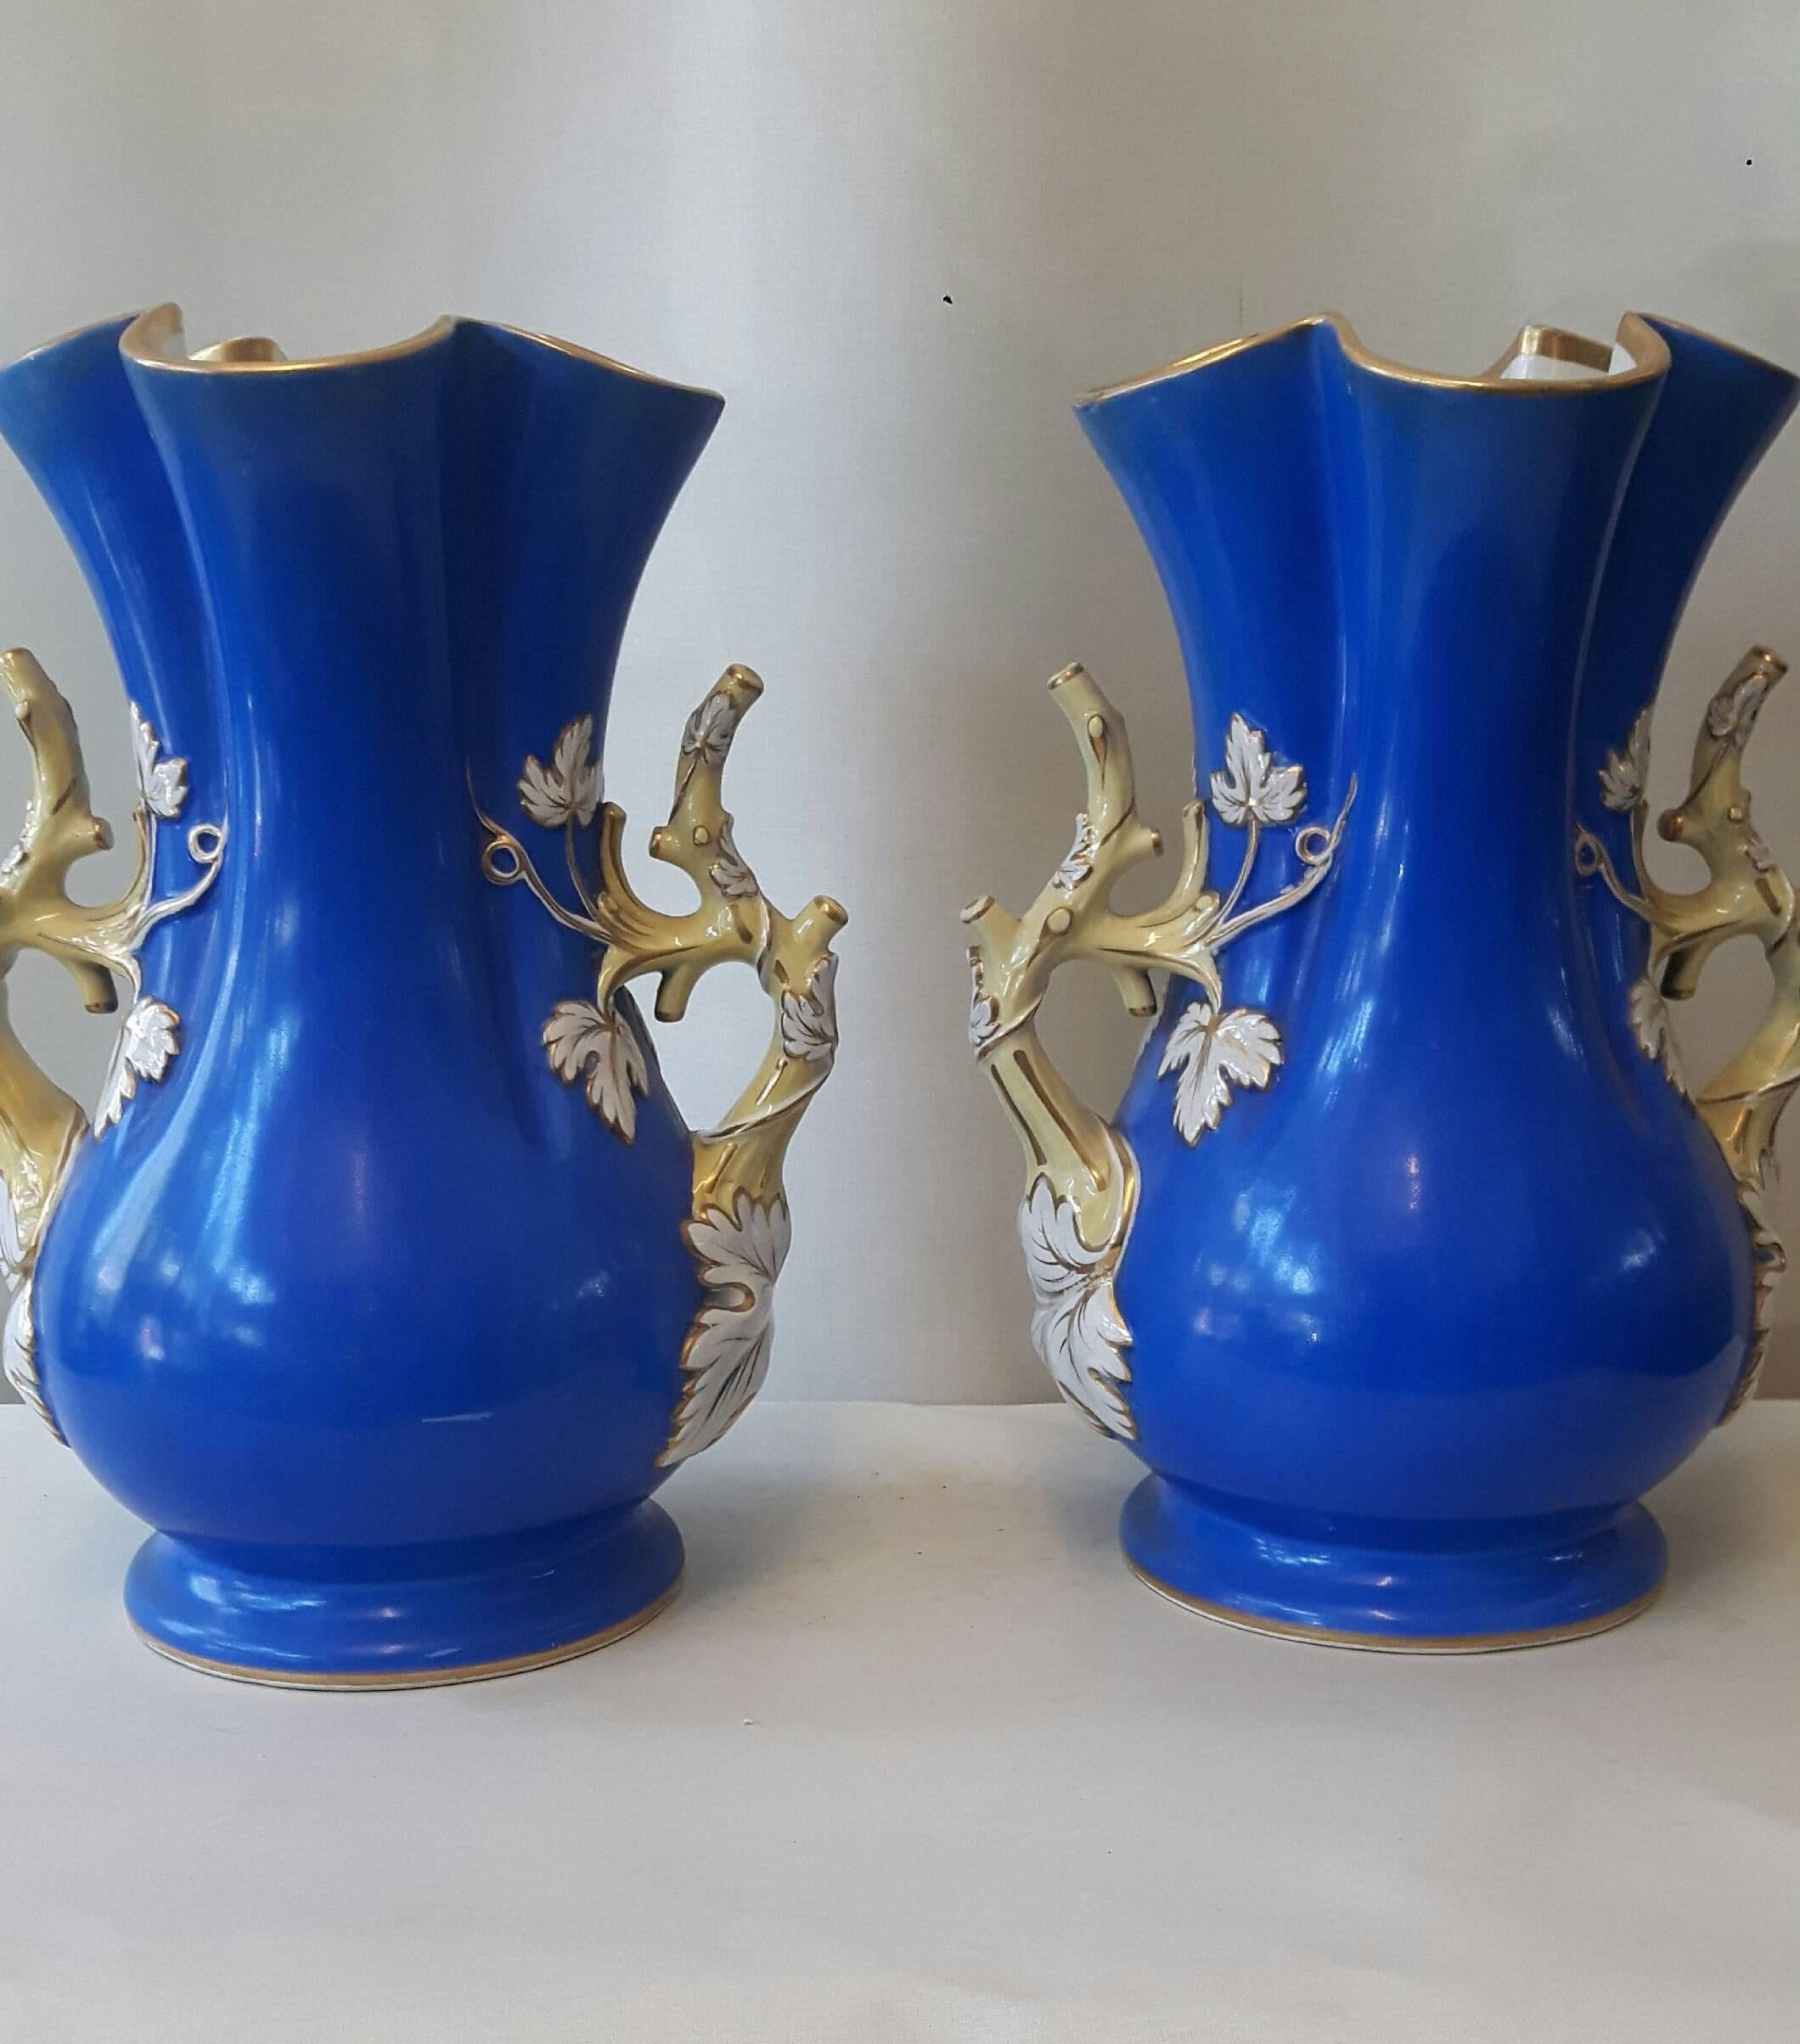 Late Victorian 19th Century Pair of Decorative English Vases For Sale